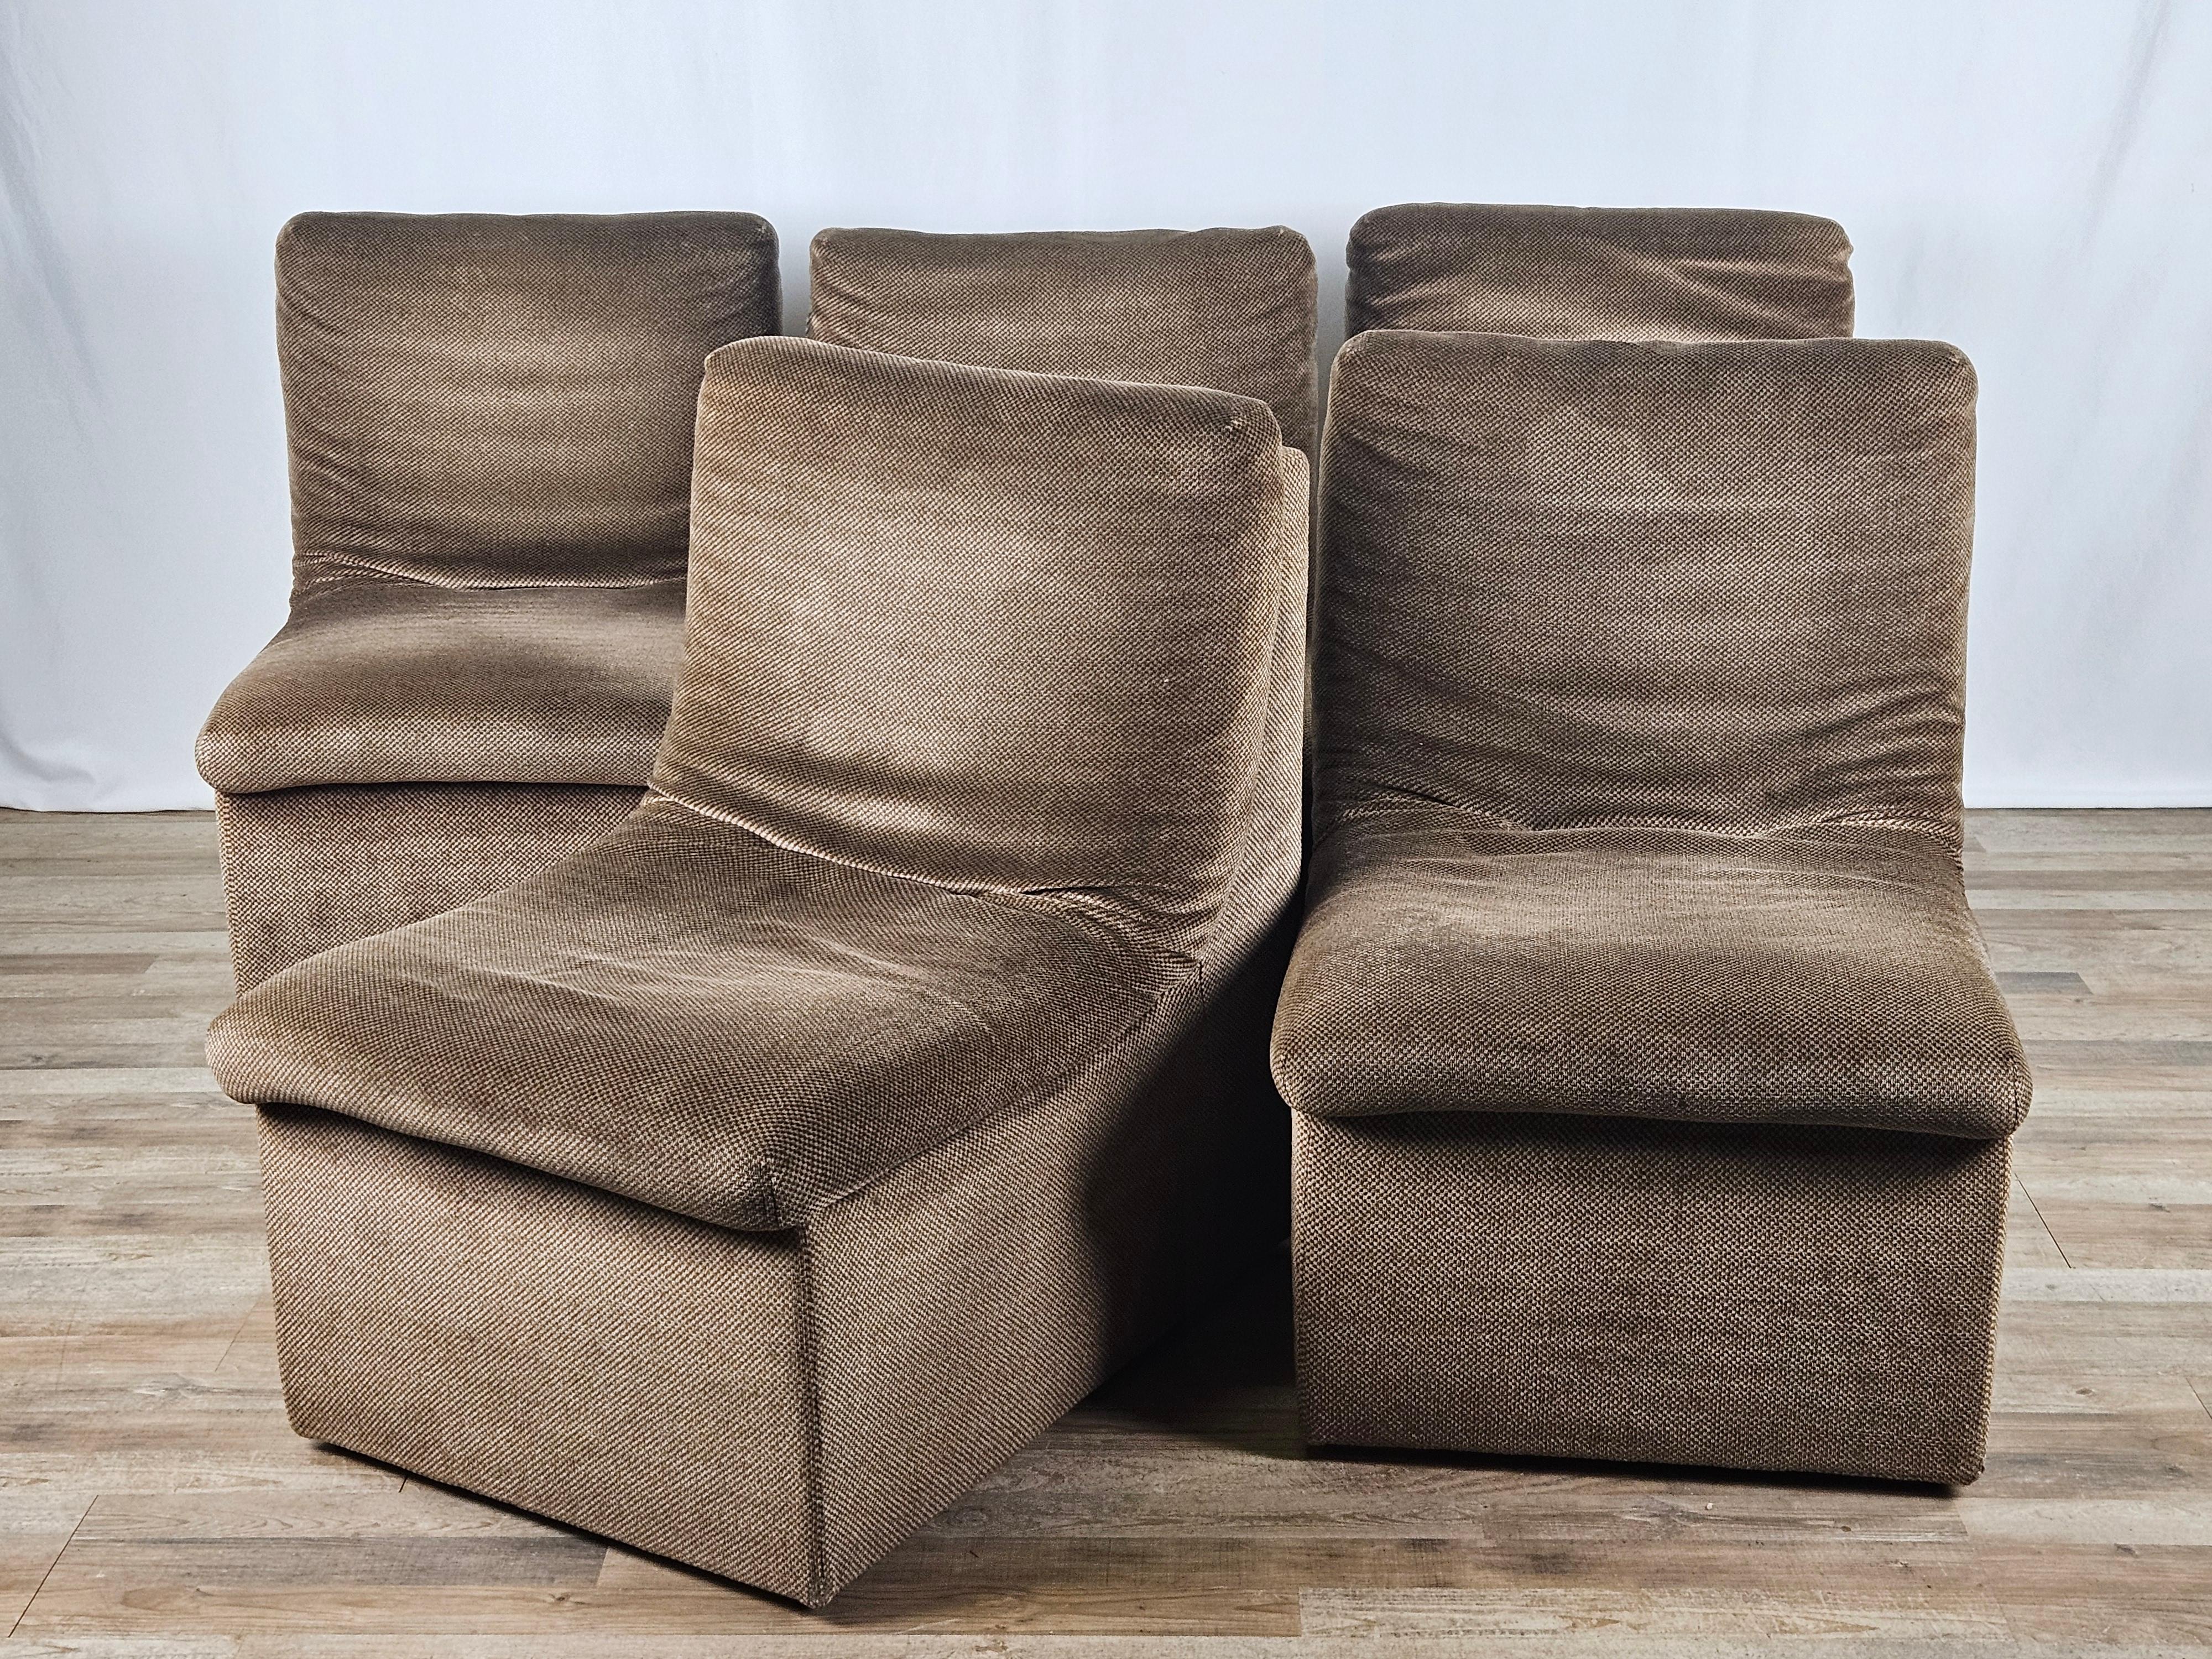 Set of five modular fabric seats with wooden feet, Italian design from the early 1970s.

The armchairs can be placed side by side or can be used individually to furnish a lounge, a waiting room in a professional office, or as furniture design